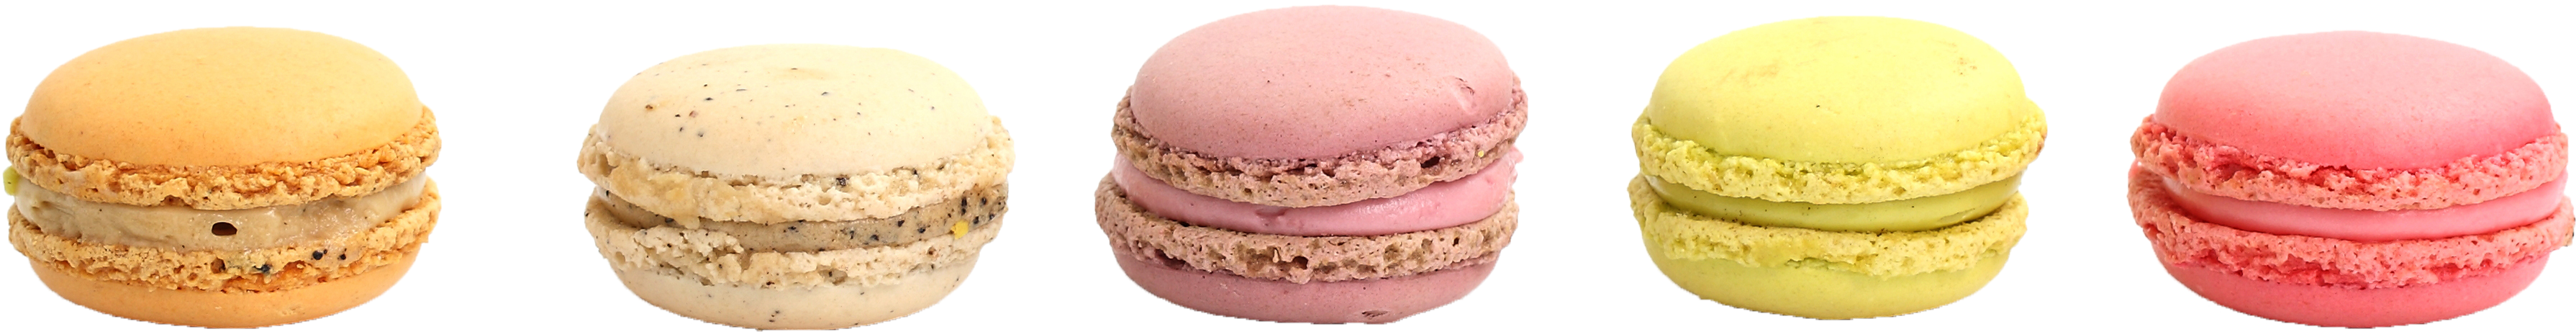 A Pink Macaroon With Brown Specks